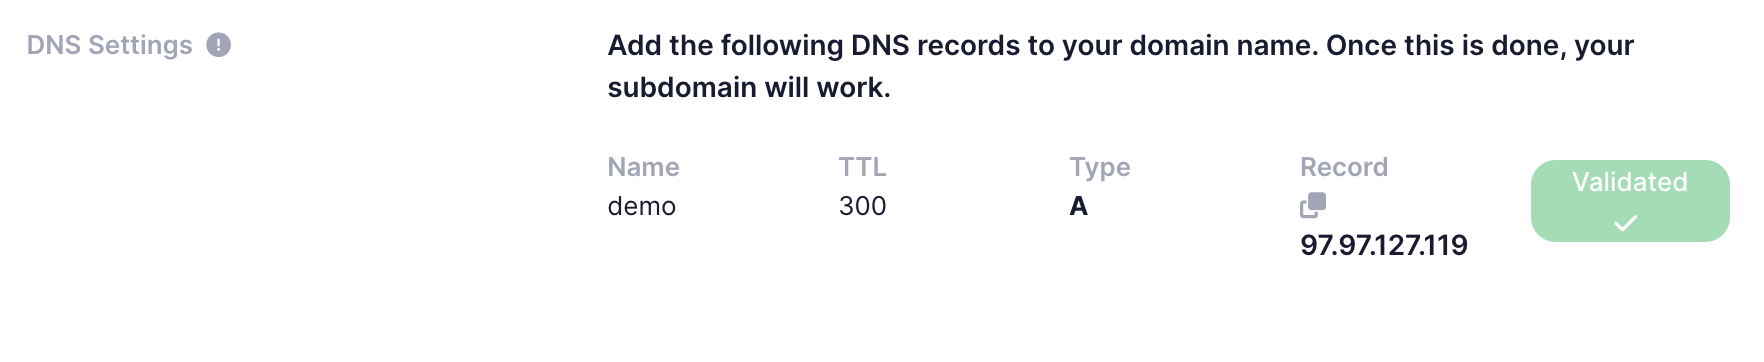 validated dns records taggrs dashboard